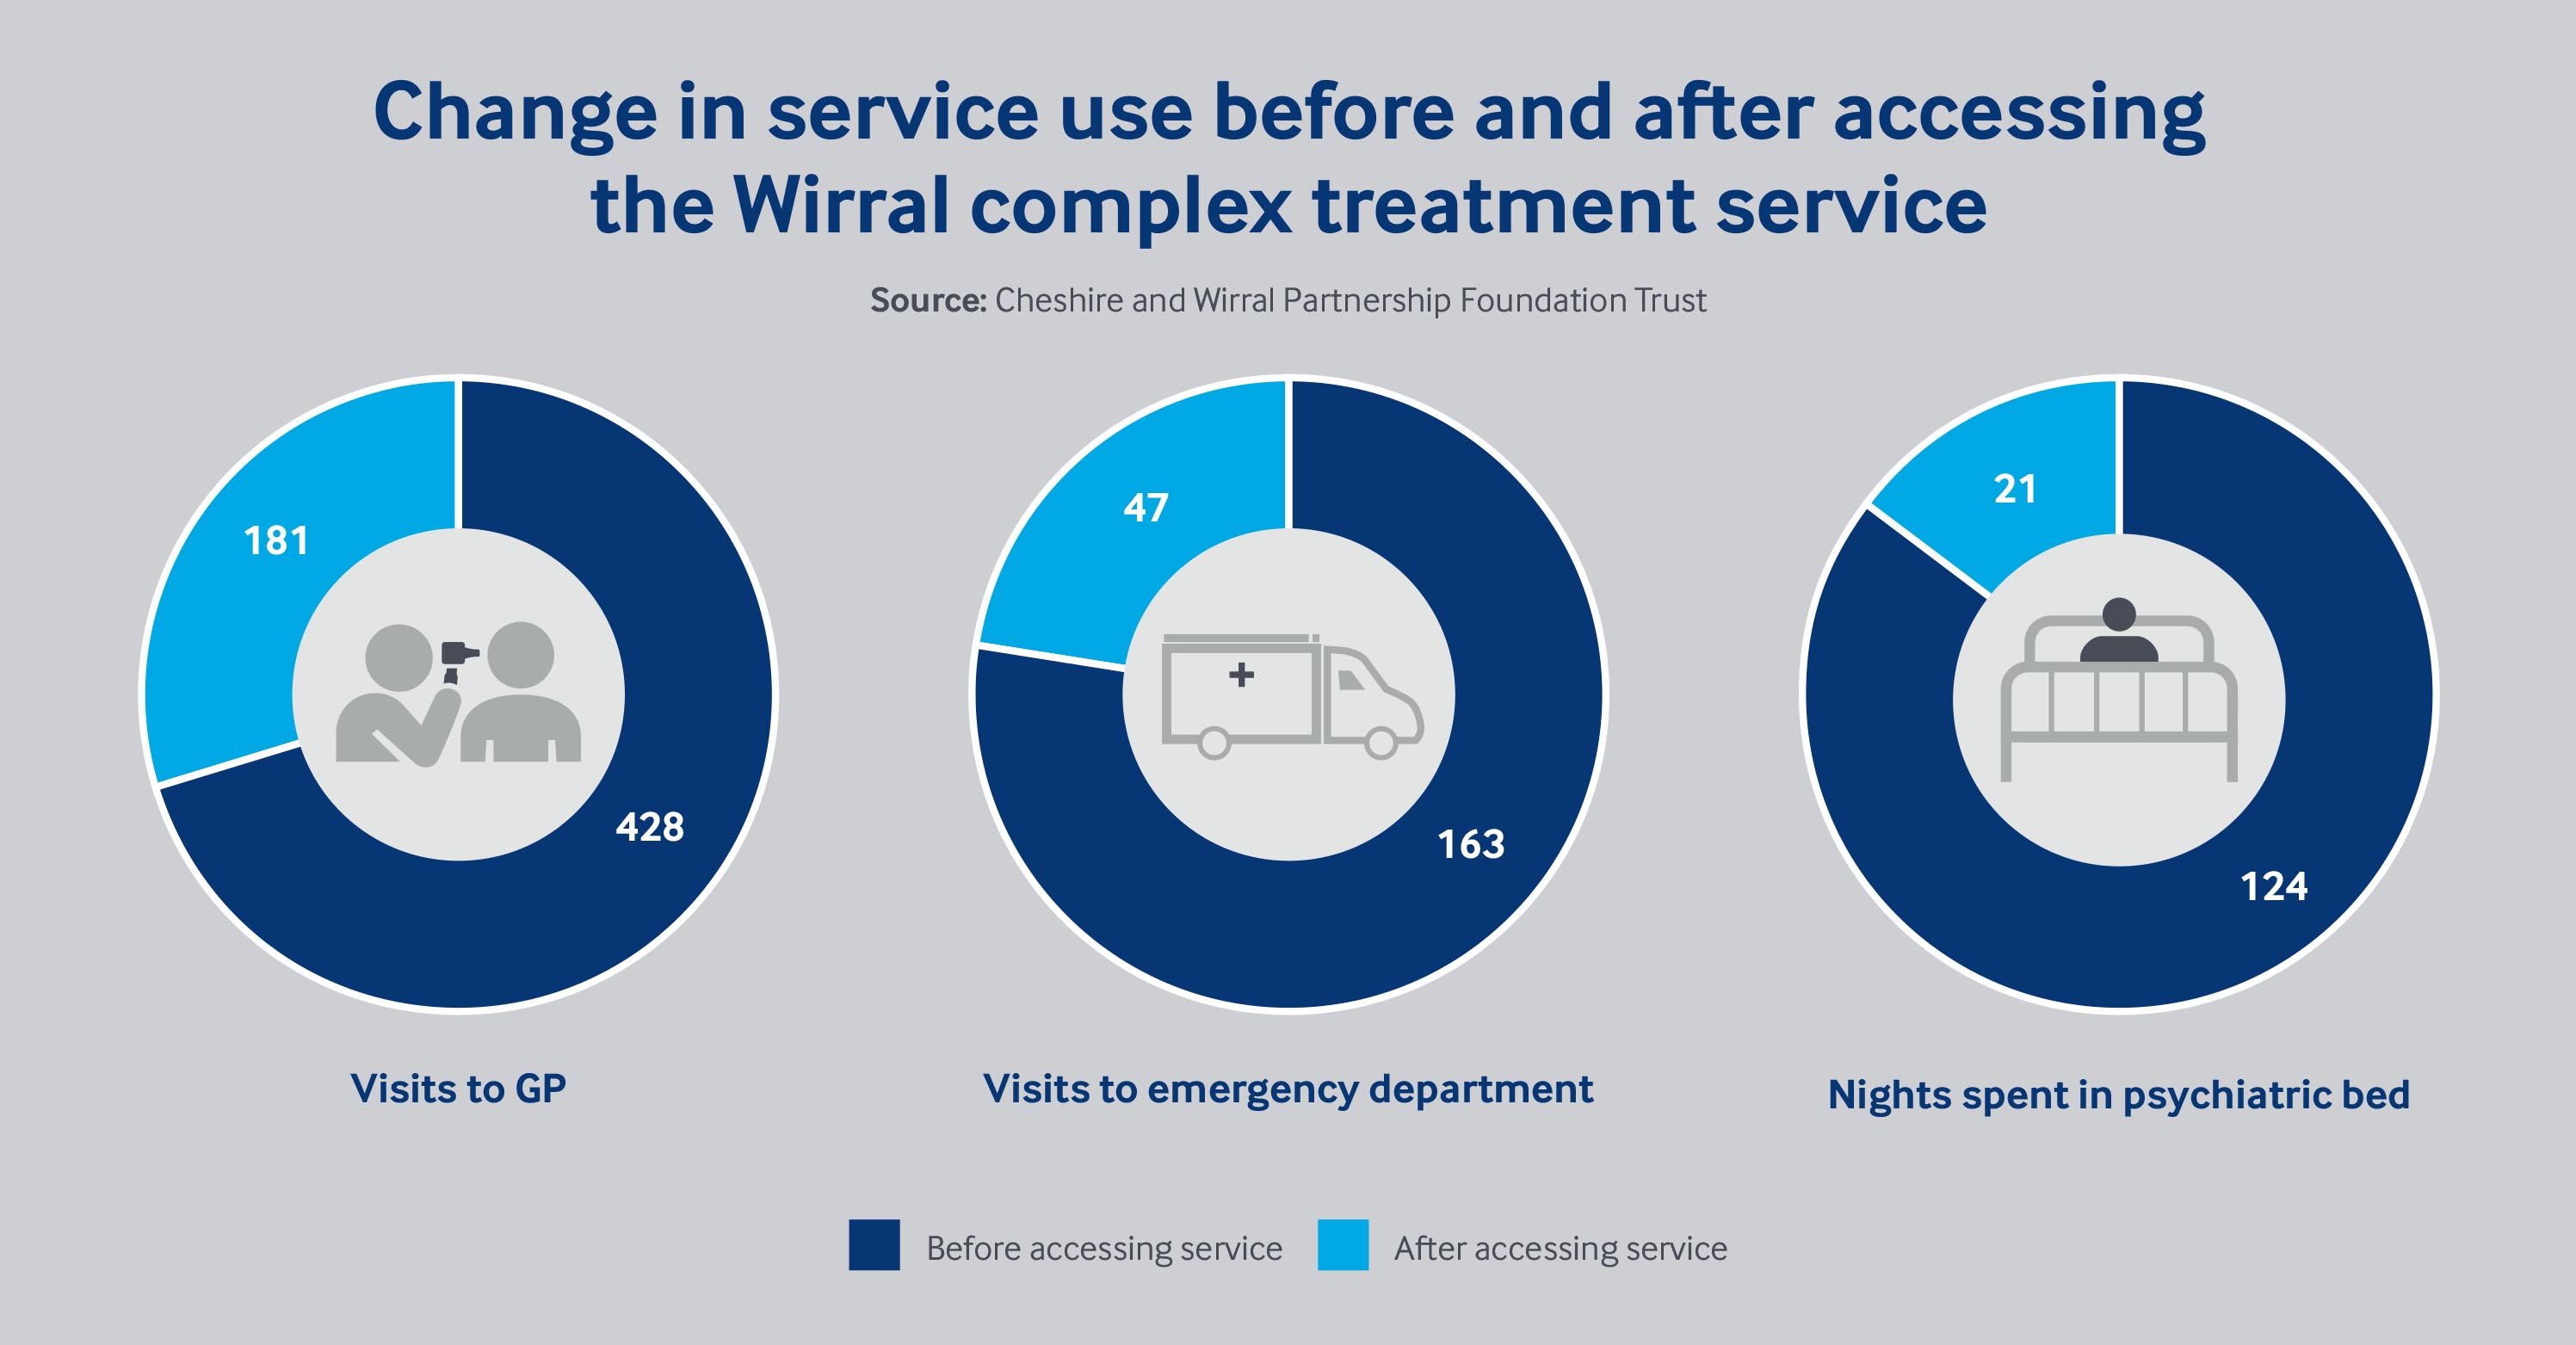 An infographic from June 2020 showing changes in service use before and after accessing the Wirral complex treatment service